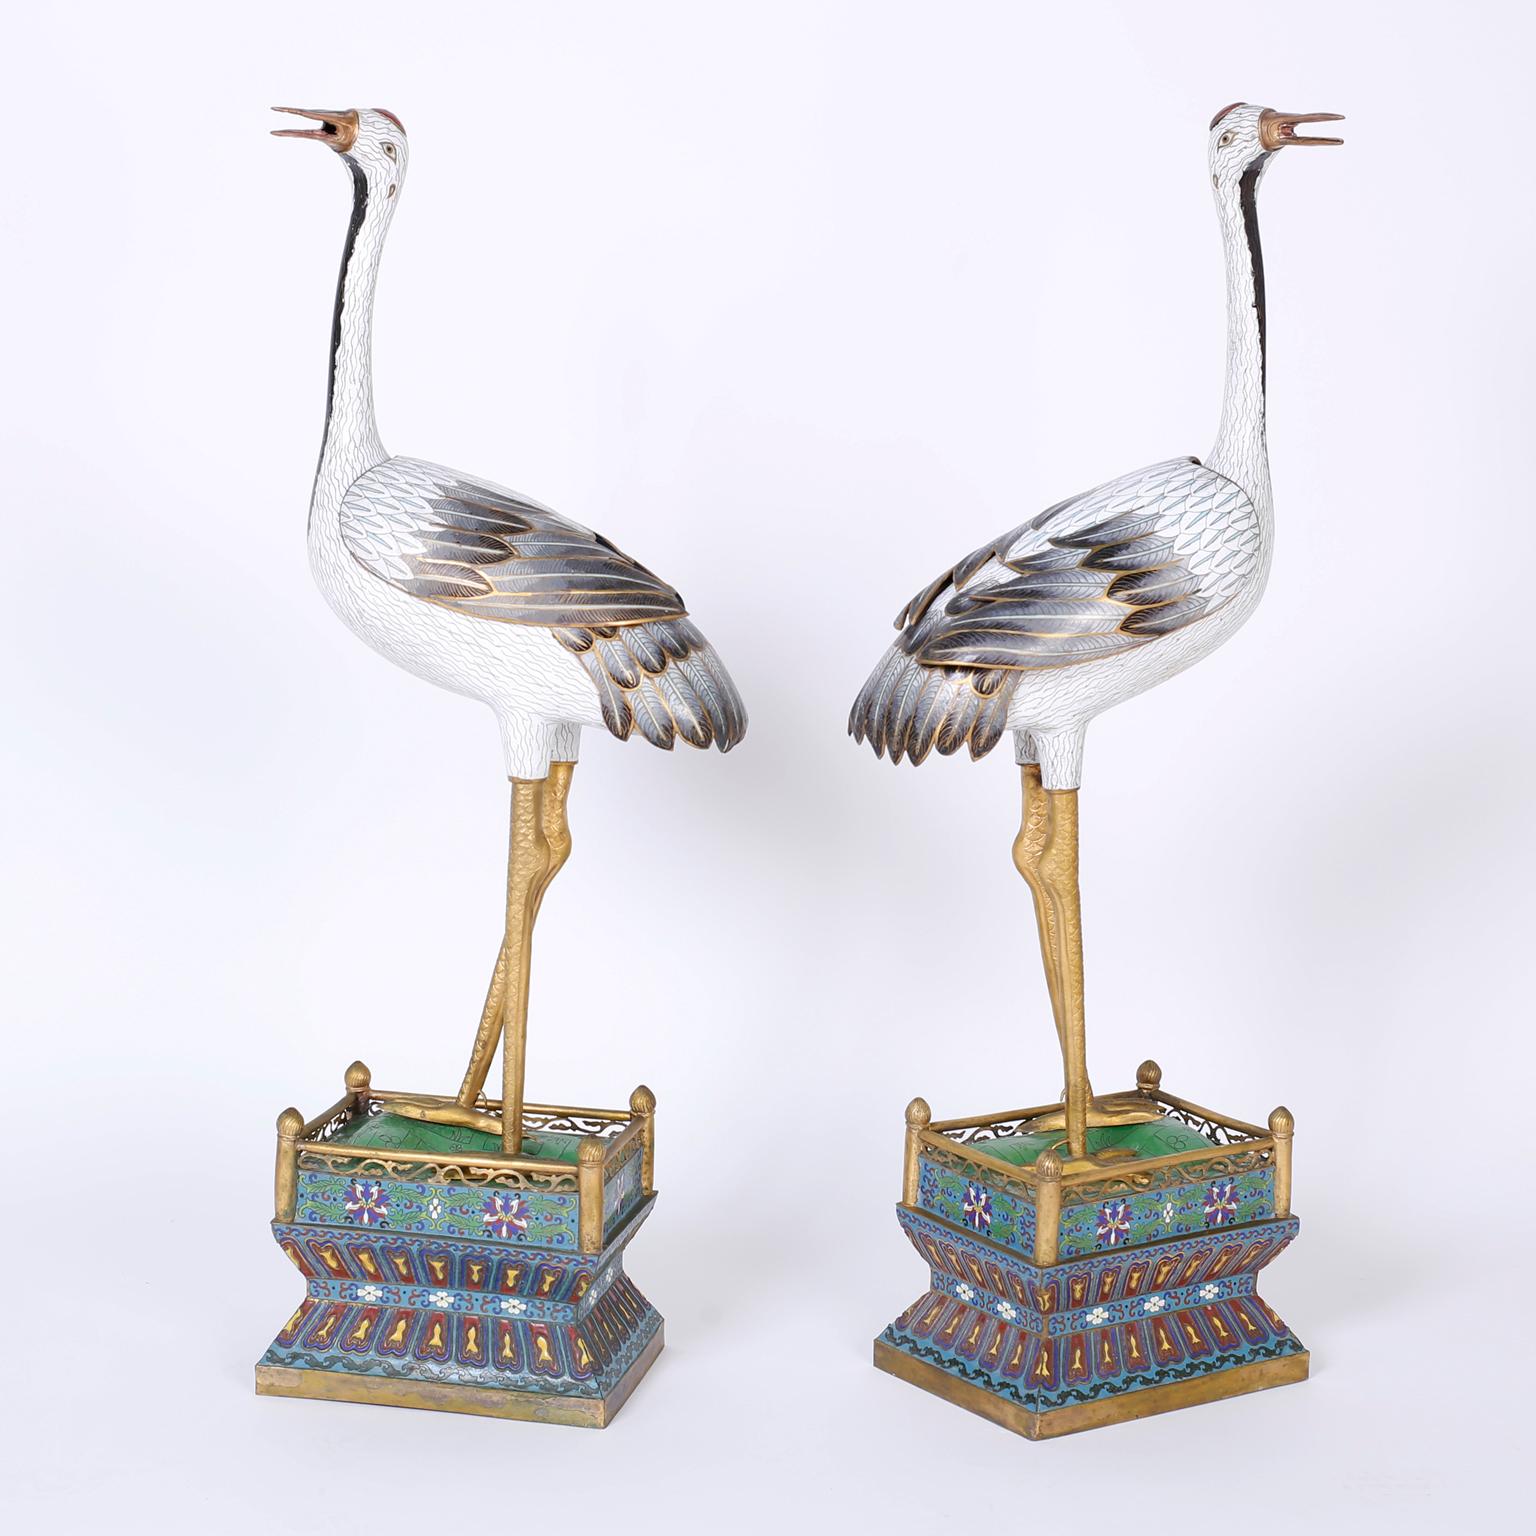 Large and impressive pair of Chinese cloisonné cranes that are a stunning example of the ancient art form of decorating brass with enamel. Each with stand out detail and removable wings.
 